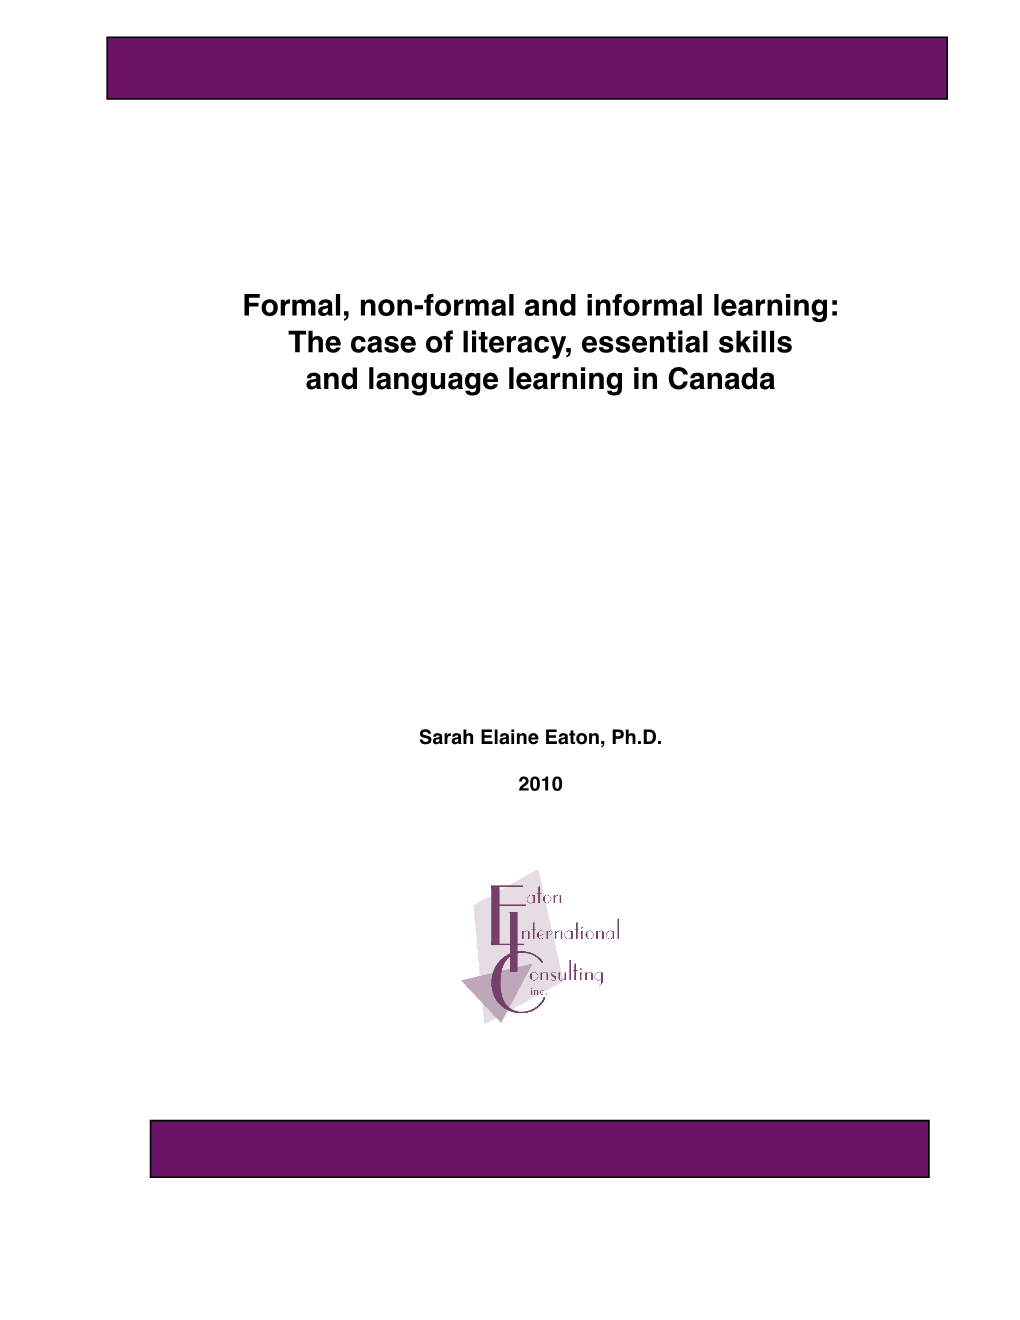 Formal, Non-Formal and Informal Learning: the Case of Literacy, Essential Skills and Language Learning in Canada